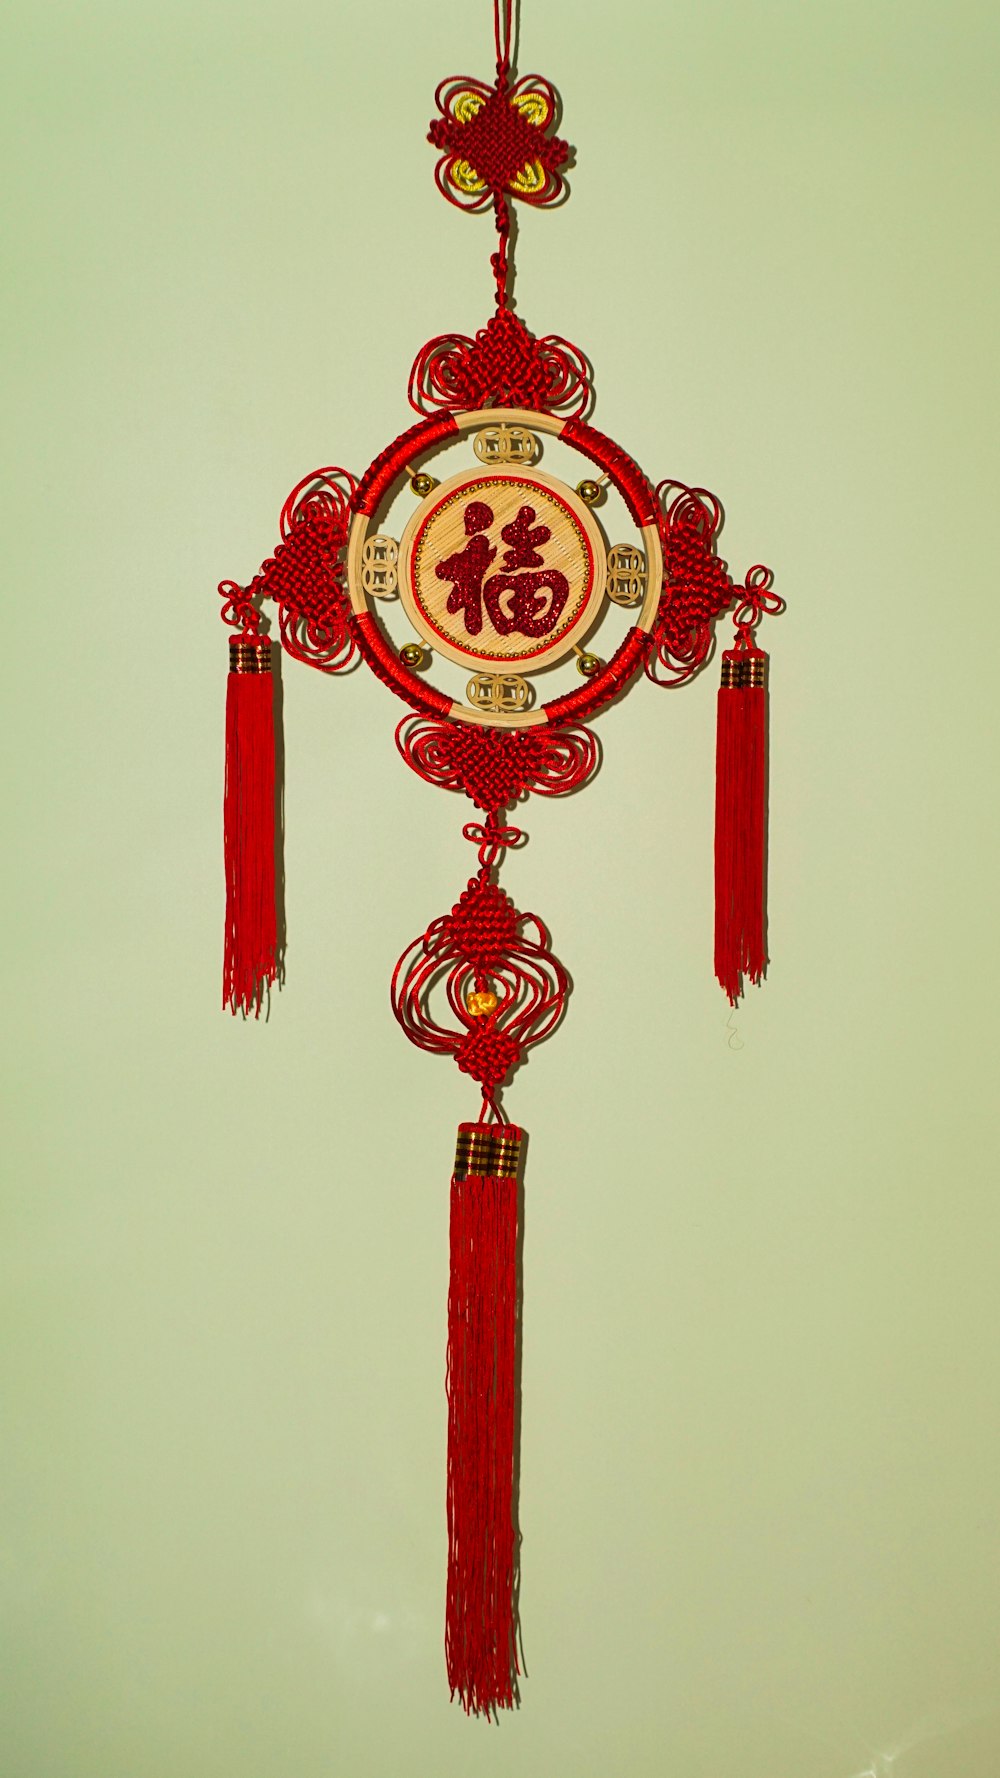 a red and white clock hanging from a ceiling